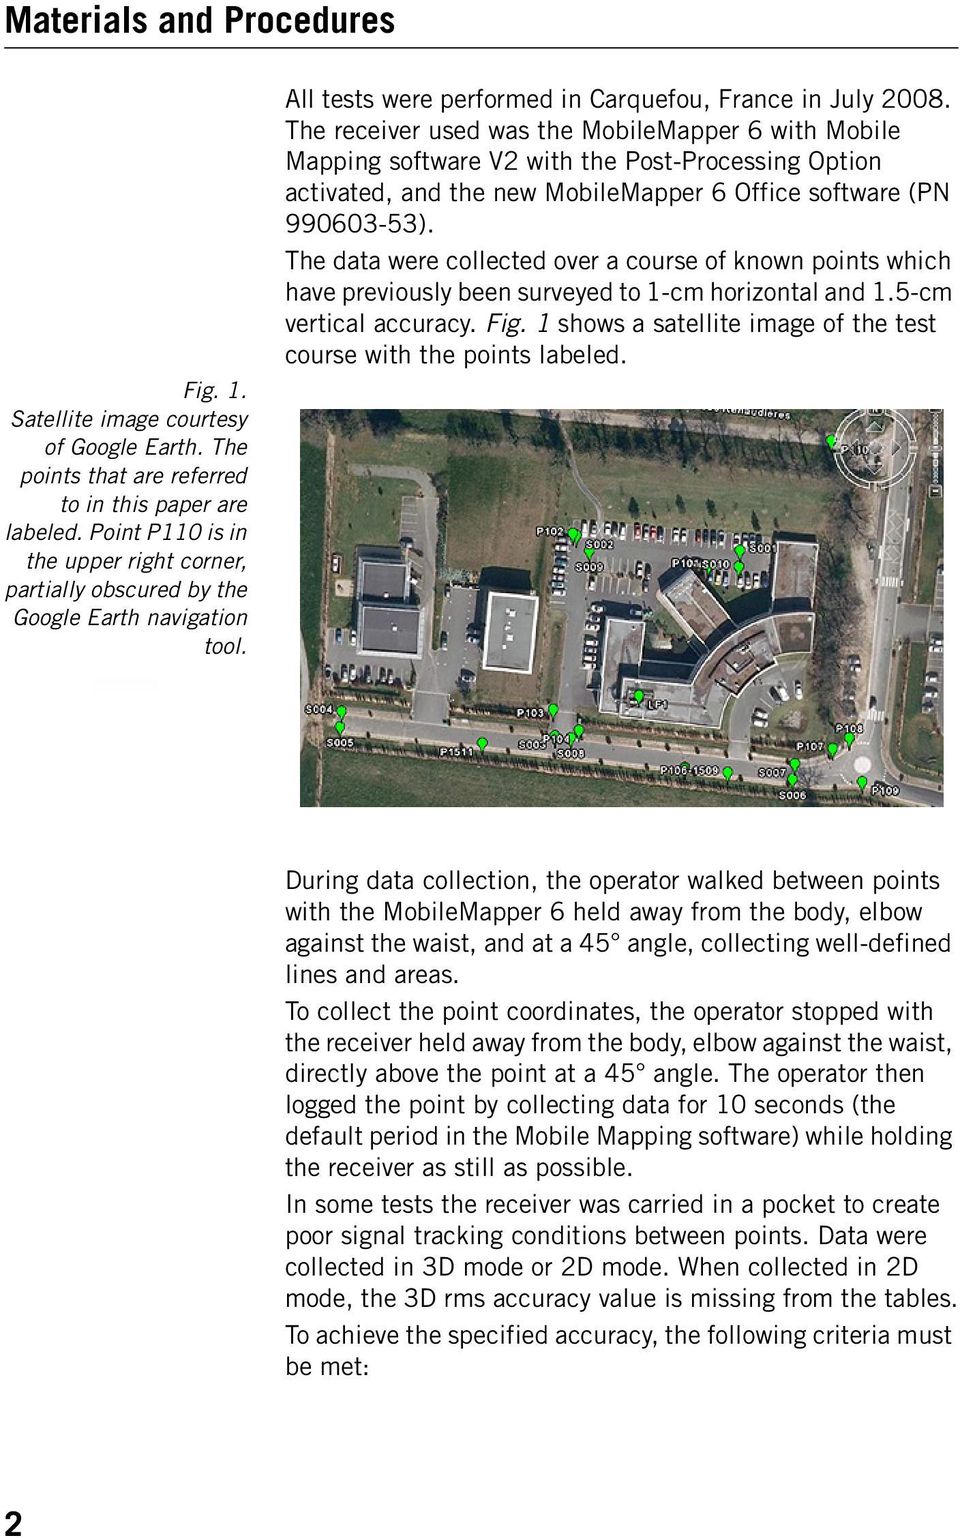 The receiver used was the MobileMapper 6 with Mobile Mapping software V2 with the Post-Processing Option activated, and the new MobileMapper 6 Office software (PN 990603-53).